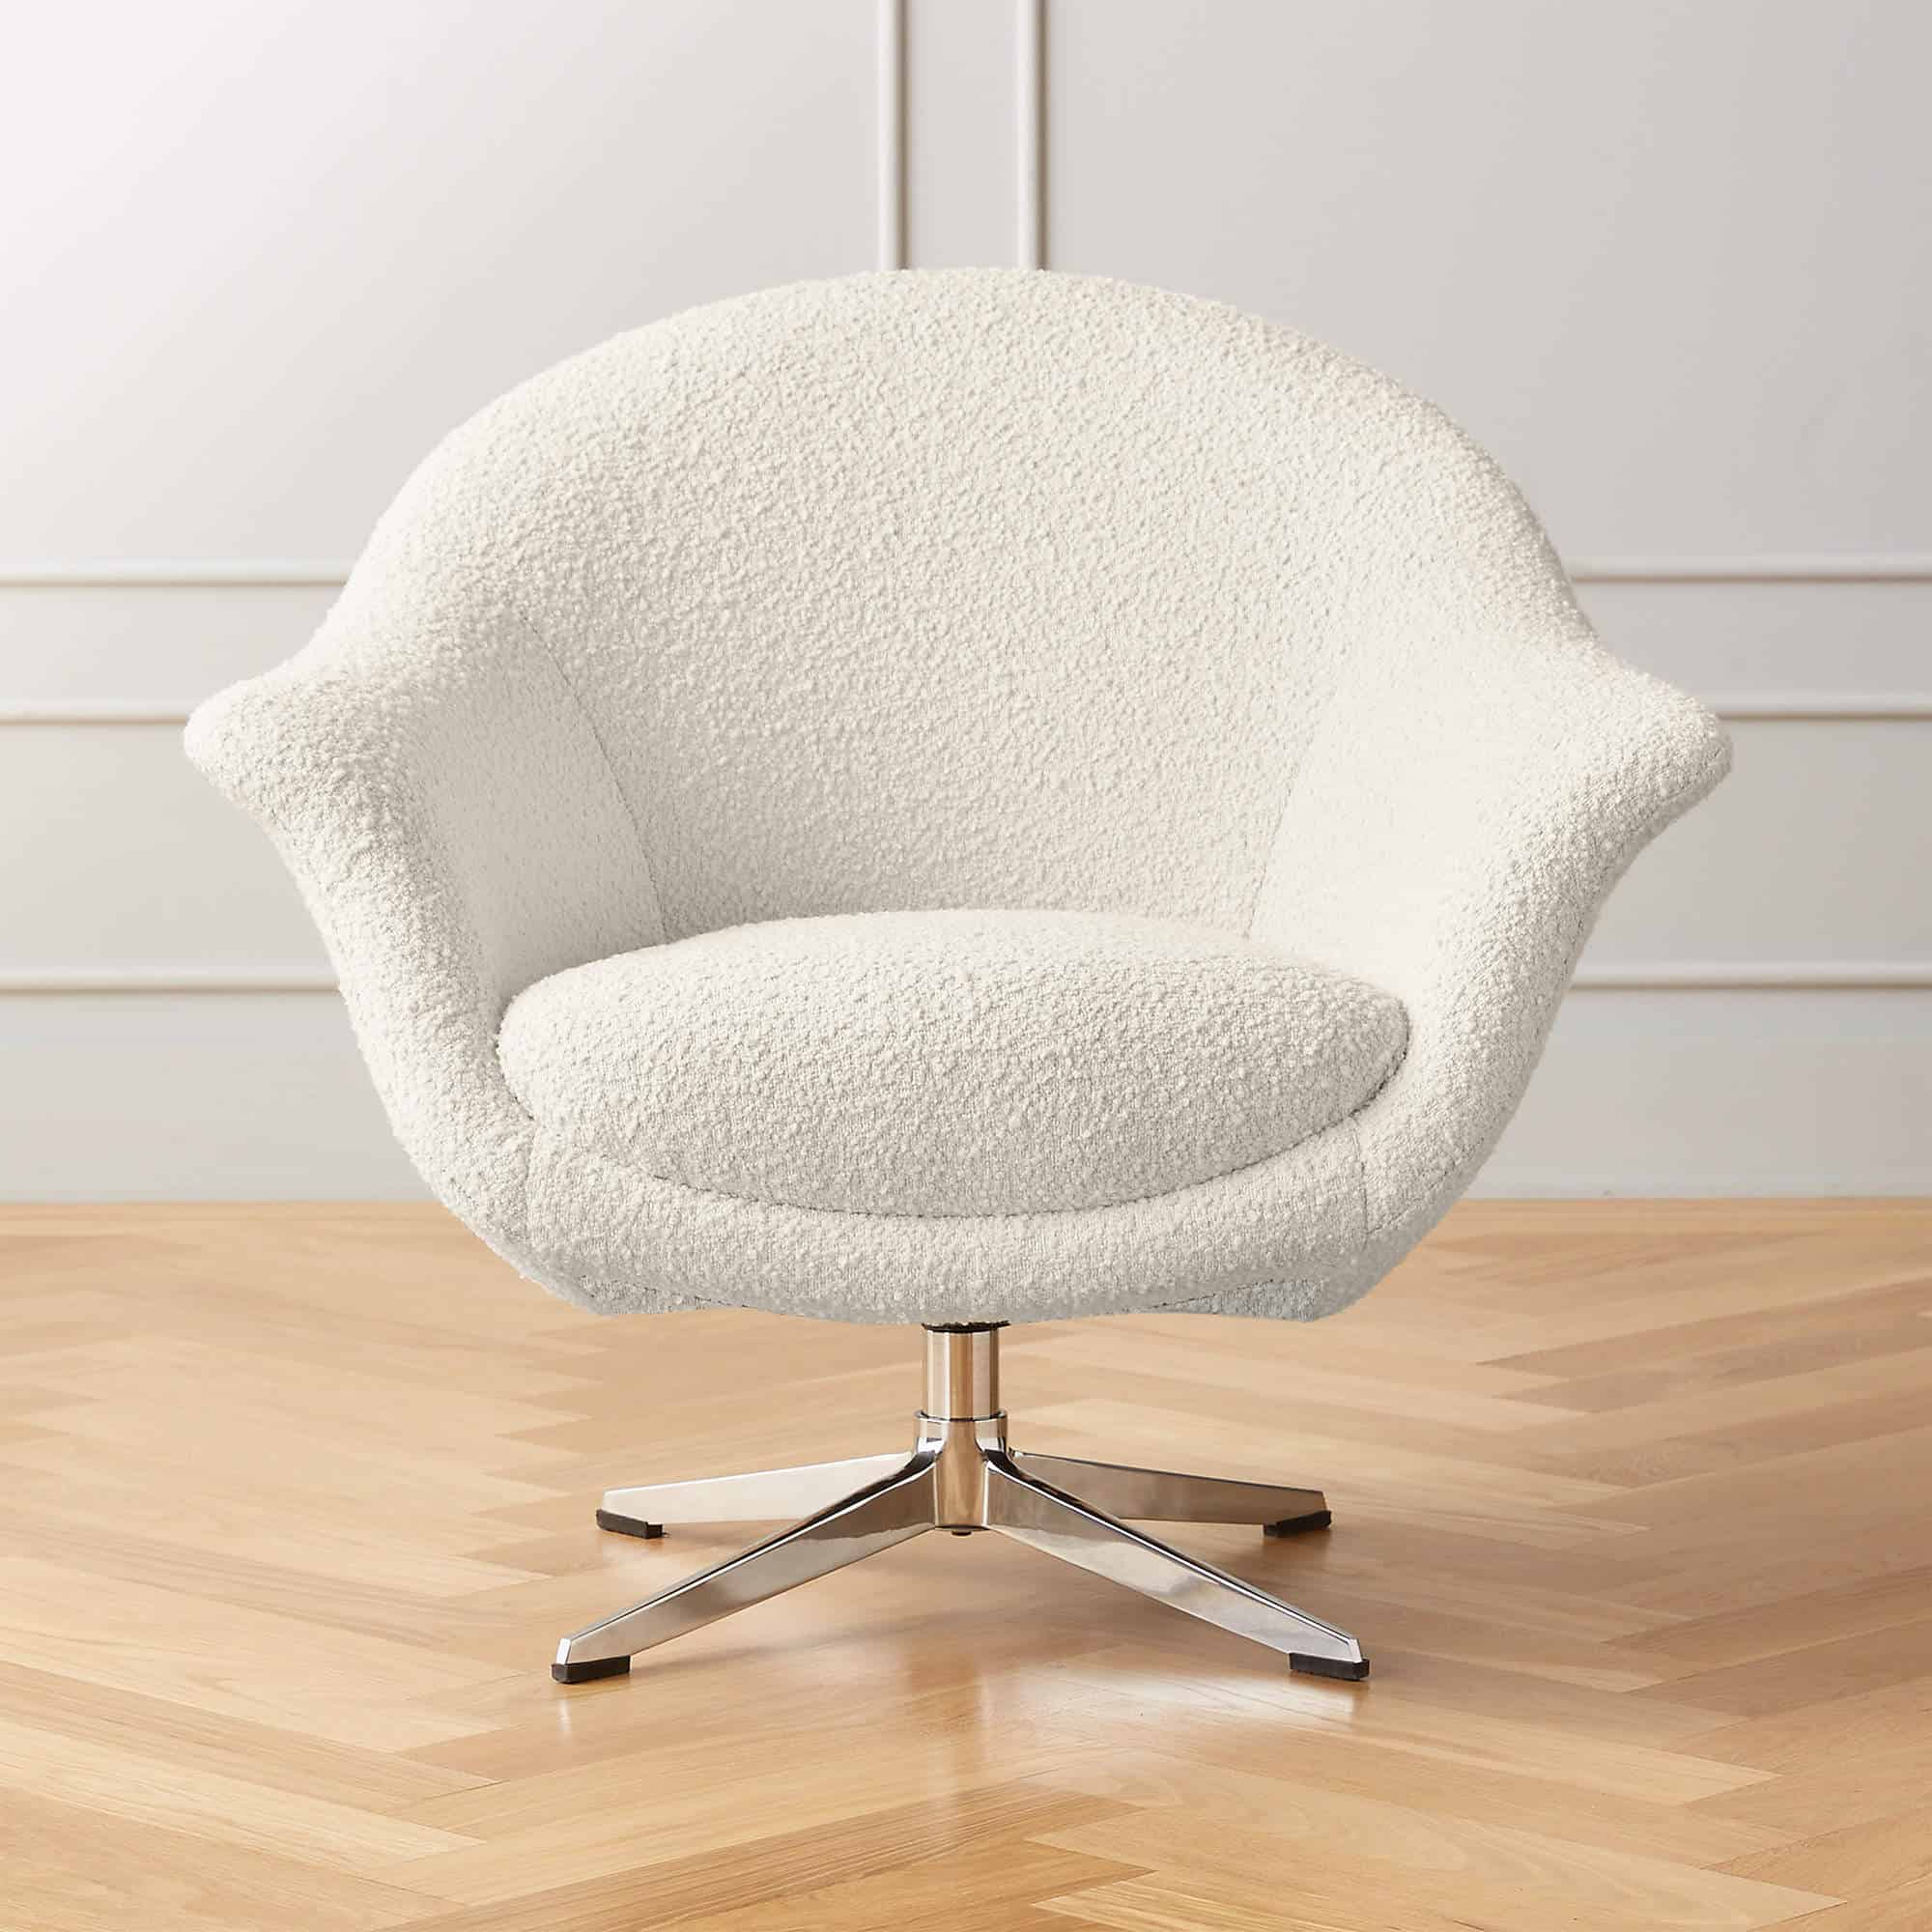 Go For Ultimate Comfort With A Teddy Fabric Chair